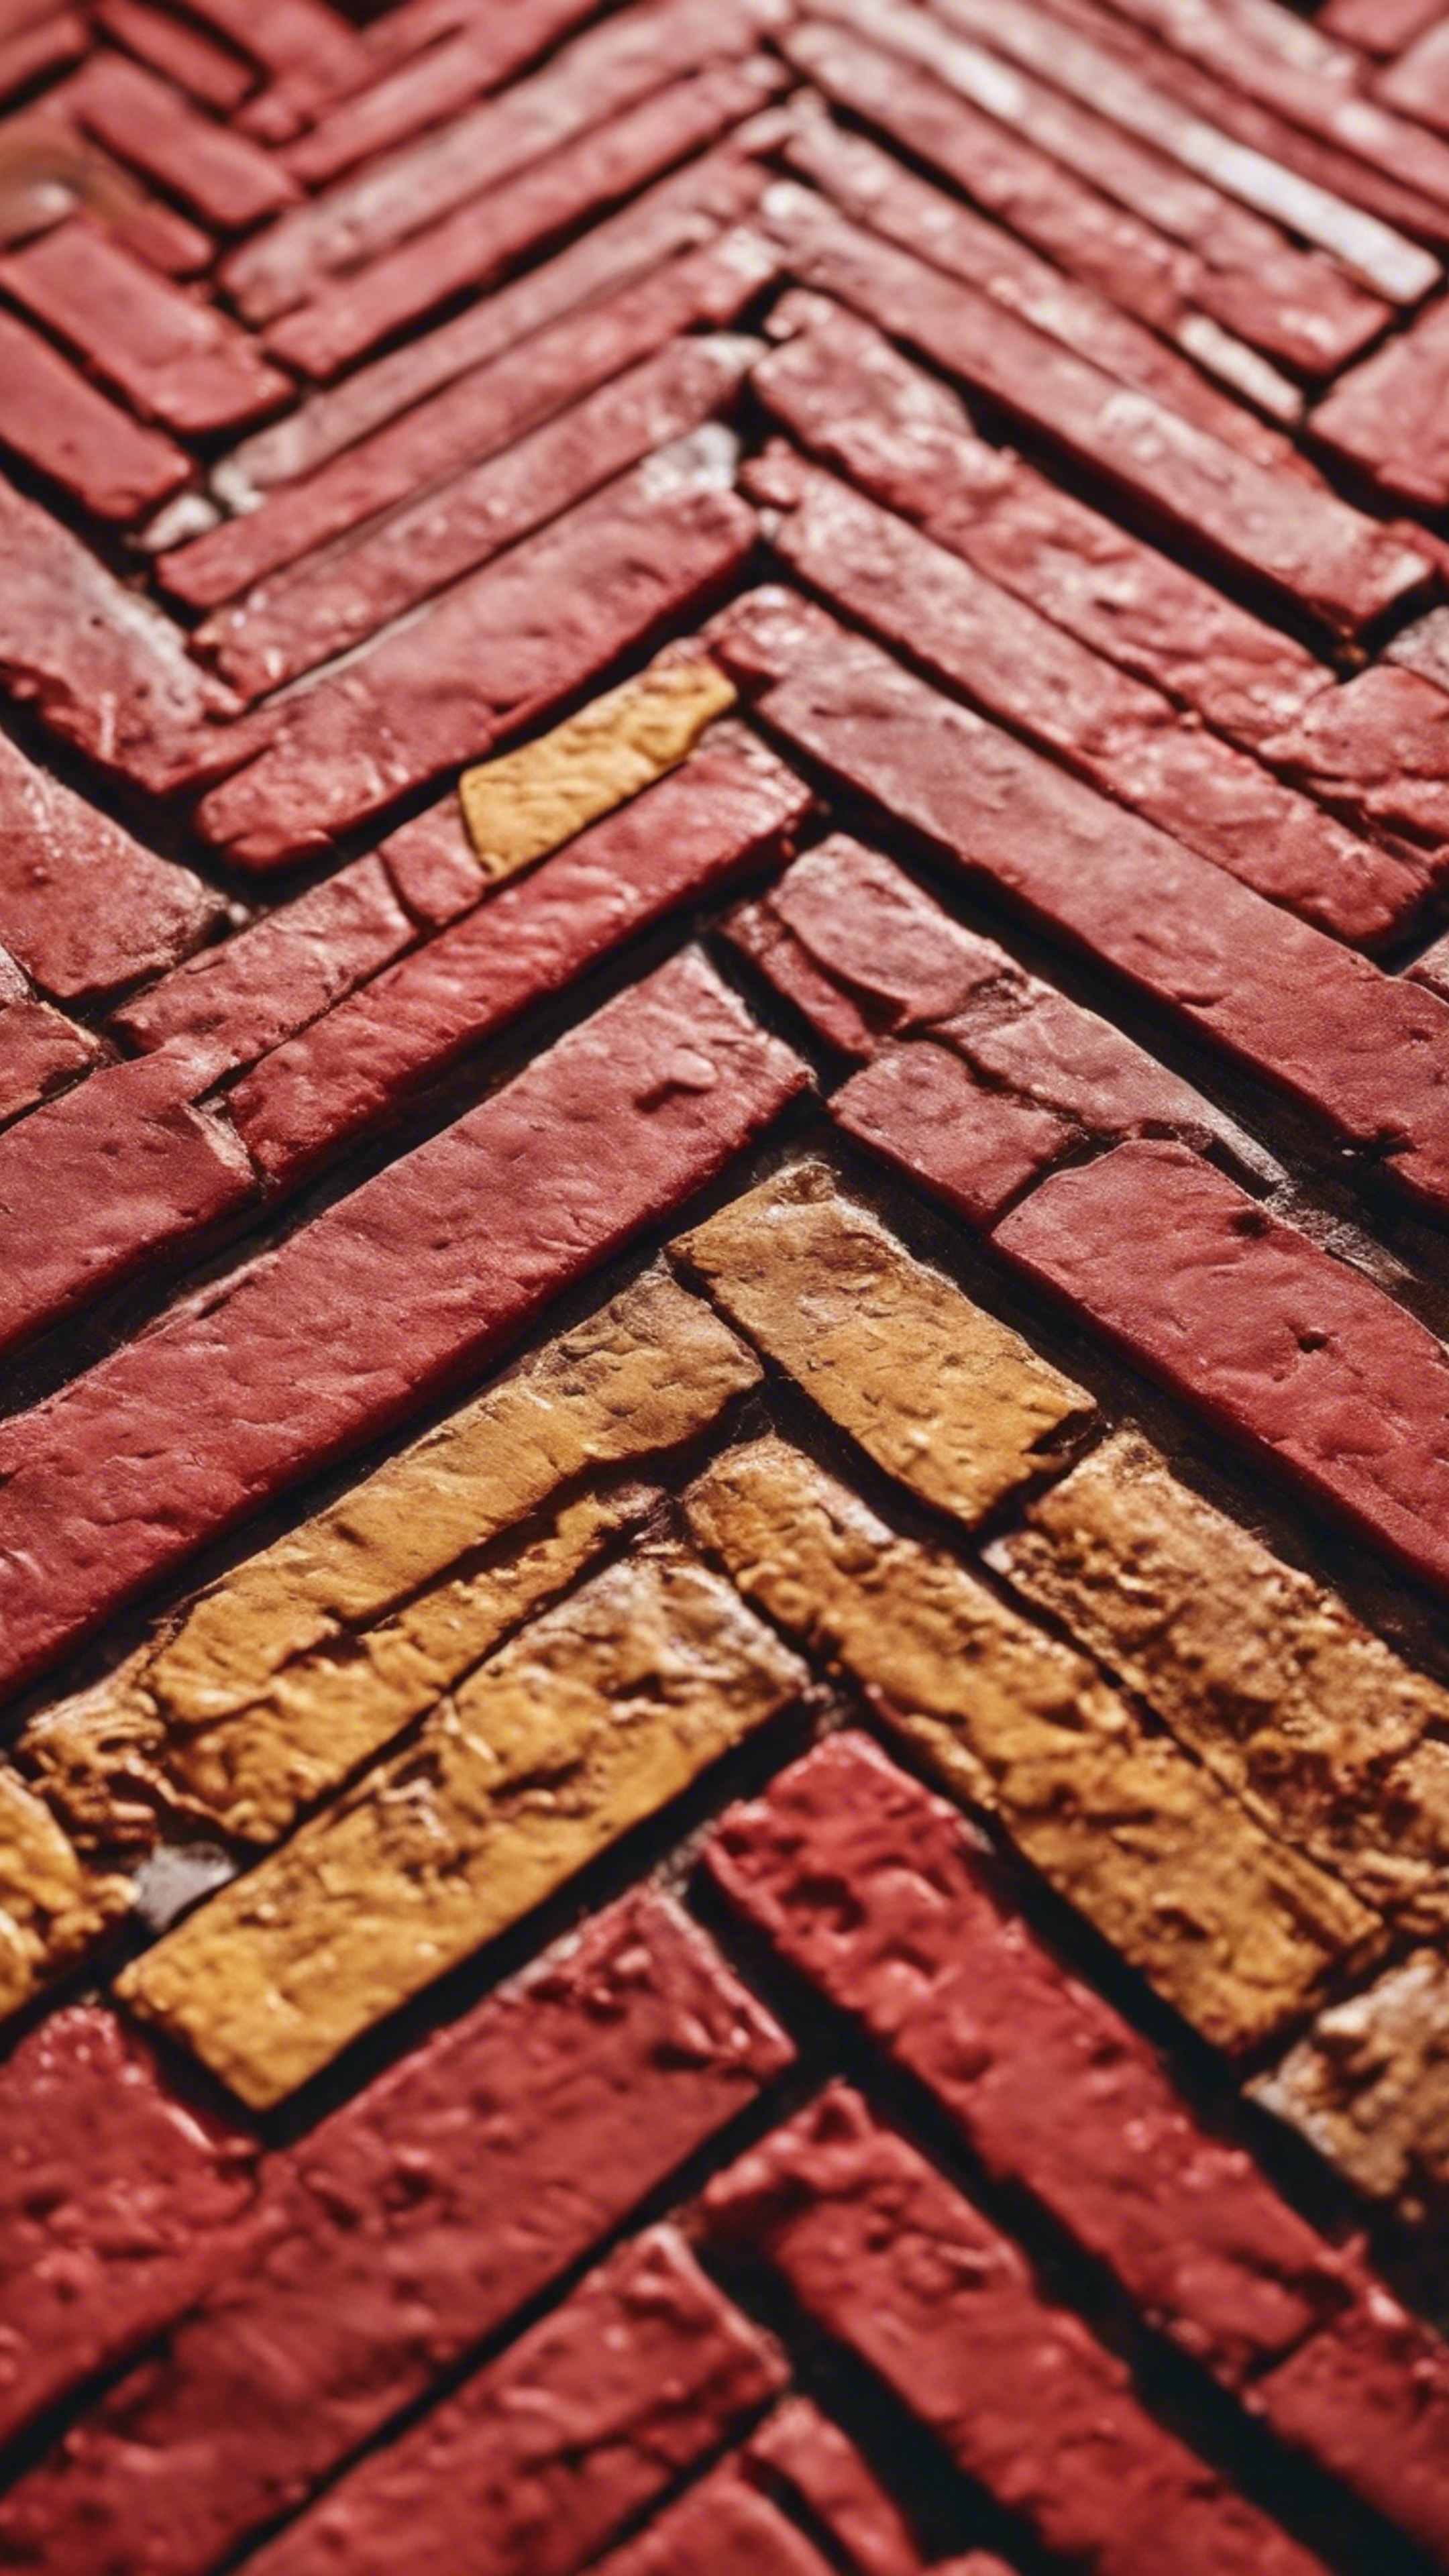 A pathway comprising a herringbone pattern using bricks in shades of red and yellow.壁紙[fb3238611eed4691b5b0]